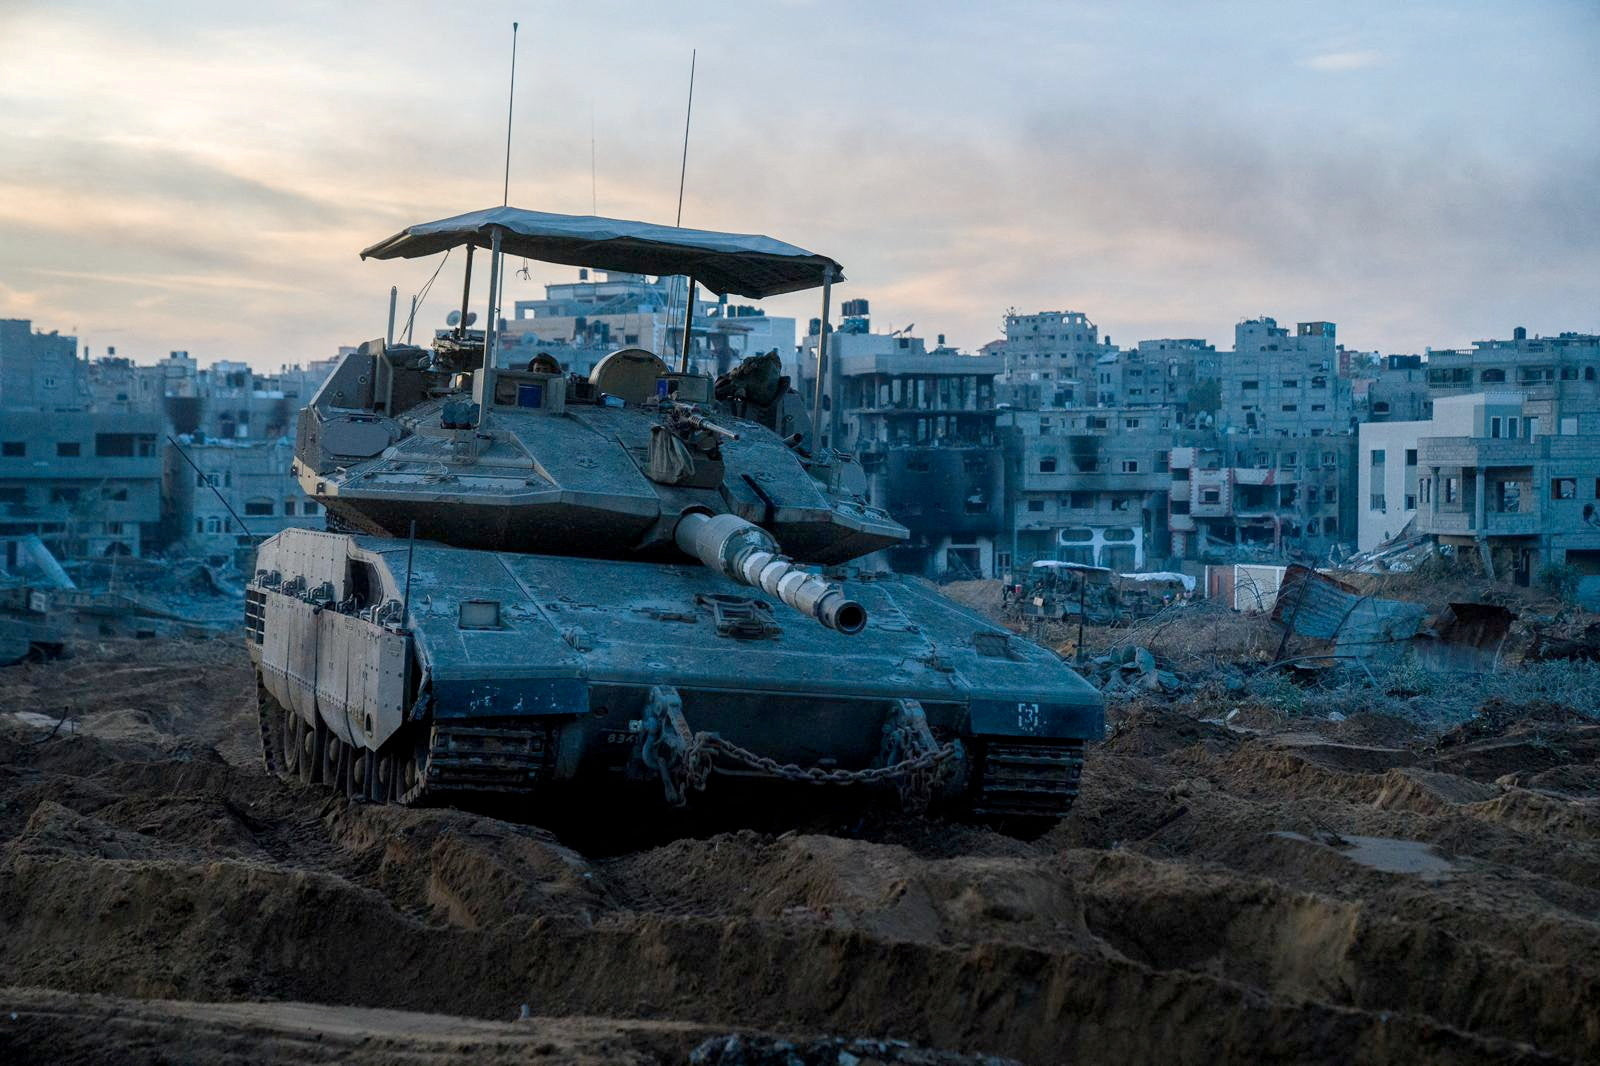 US skips congressional review to approve emergency sale of tank shells to Israel